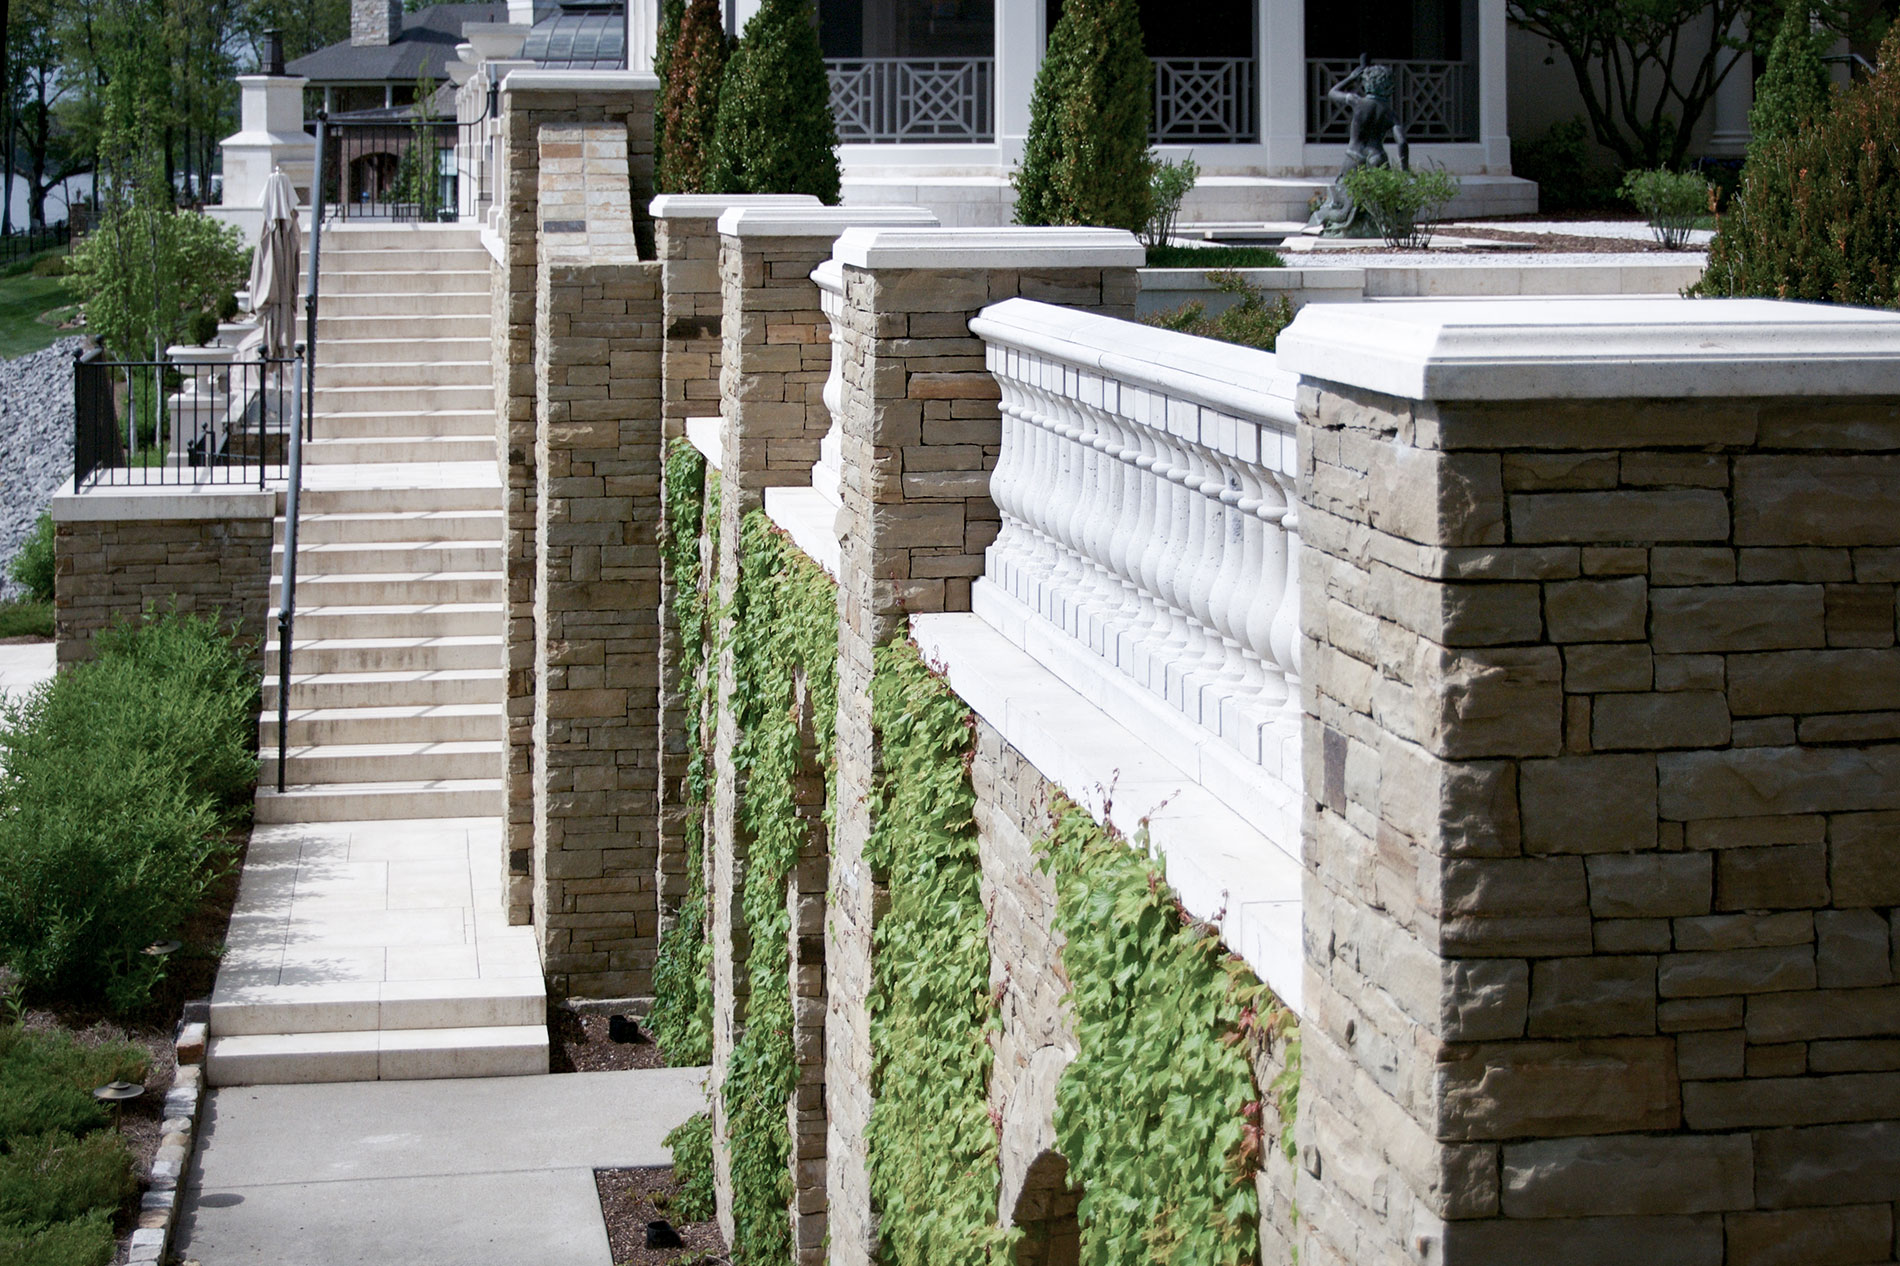 These stairs, with stair treads, have their landings paved with the same deck pavers